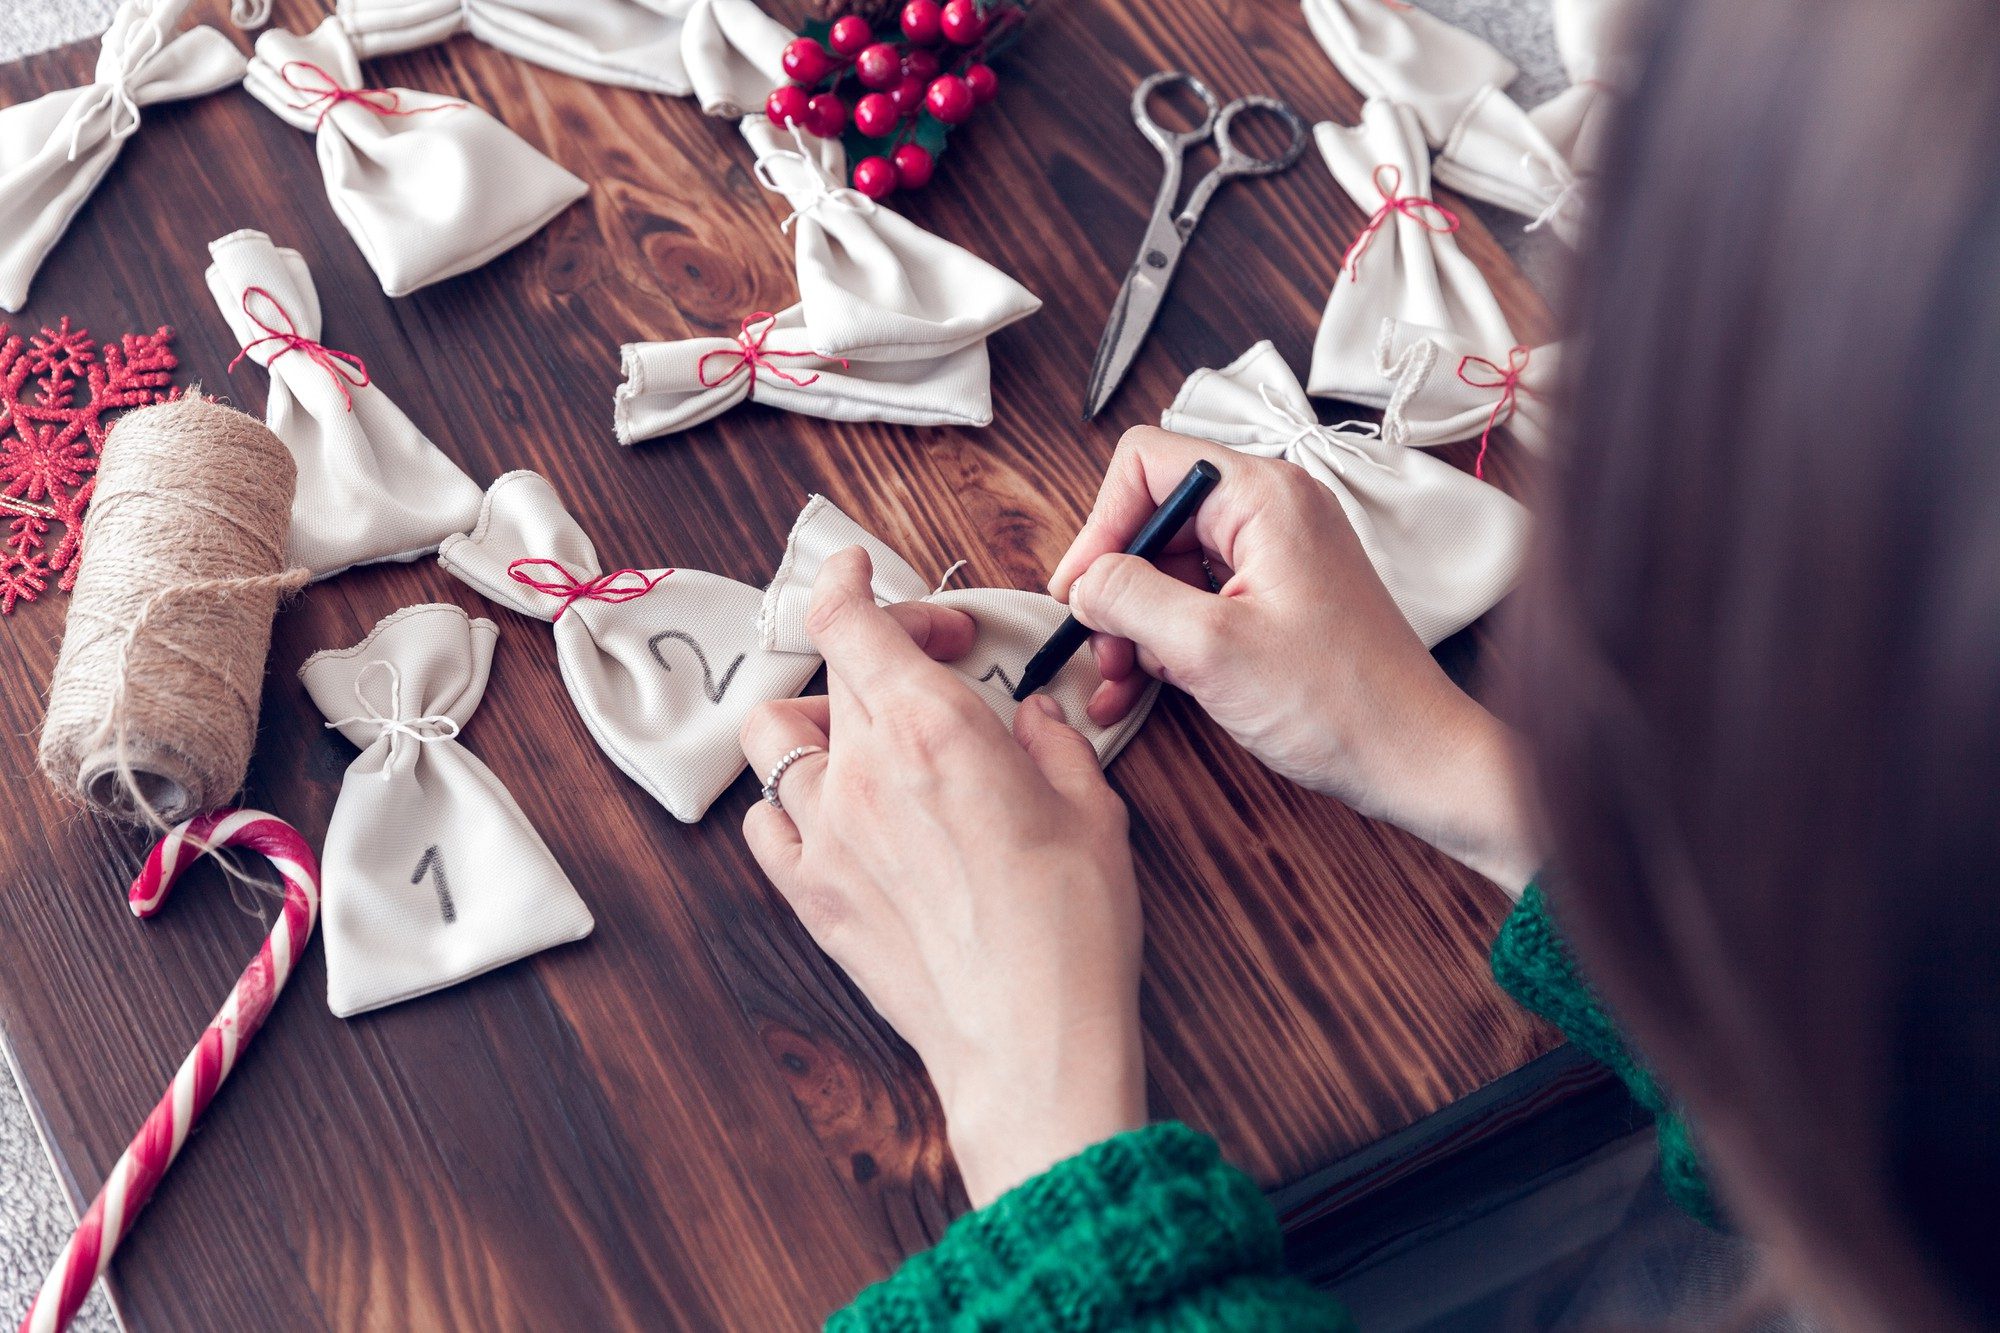 Stressed about the Holidays? Try These Anti-Stress Techniques This Holiday Season